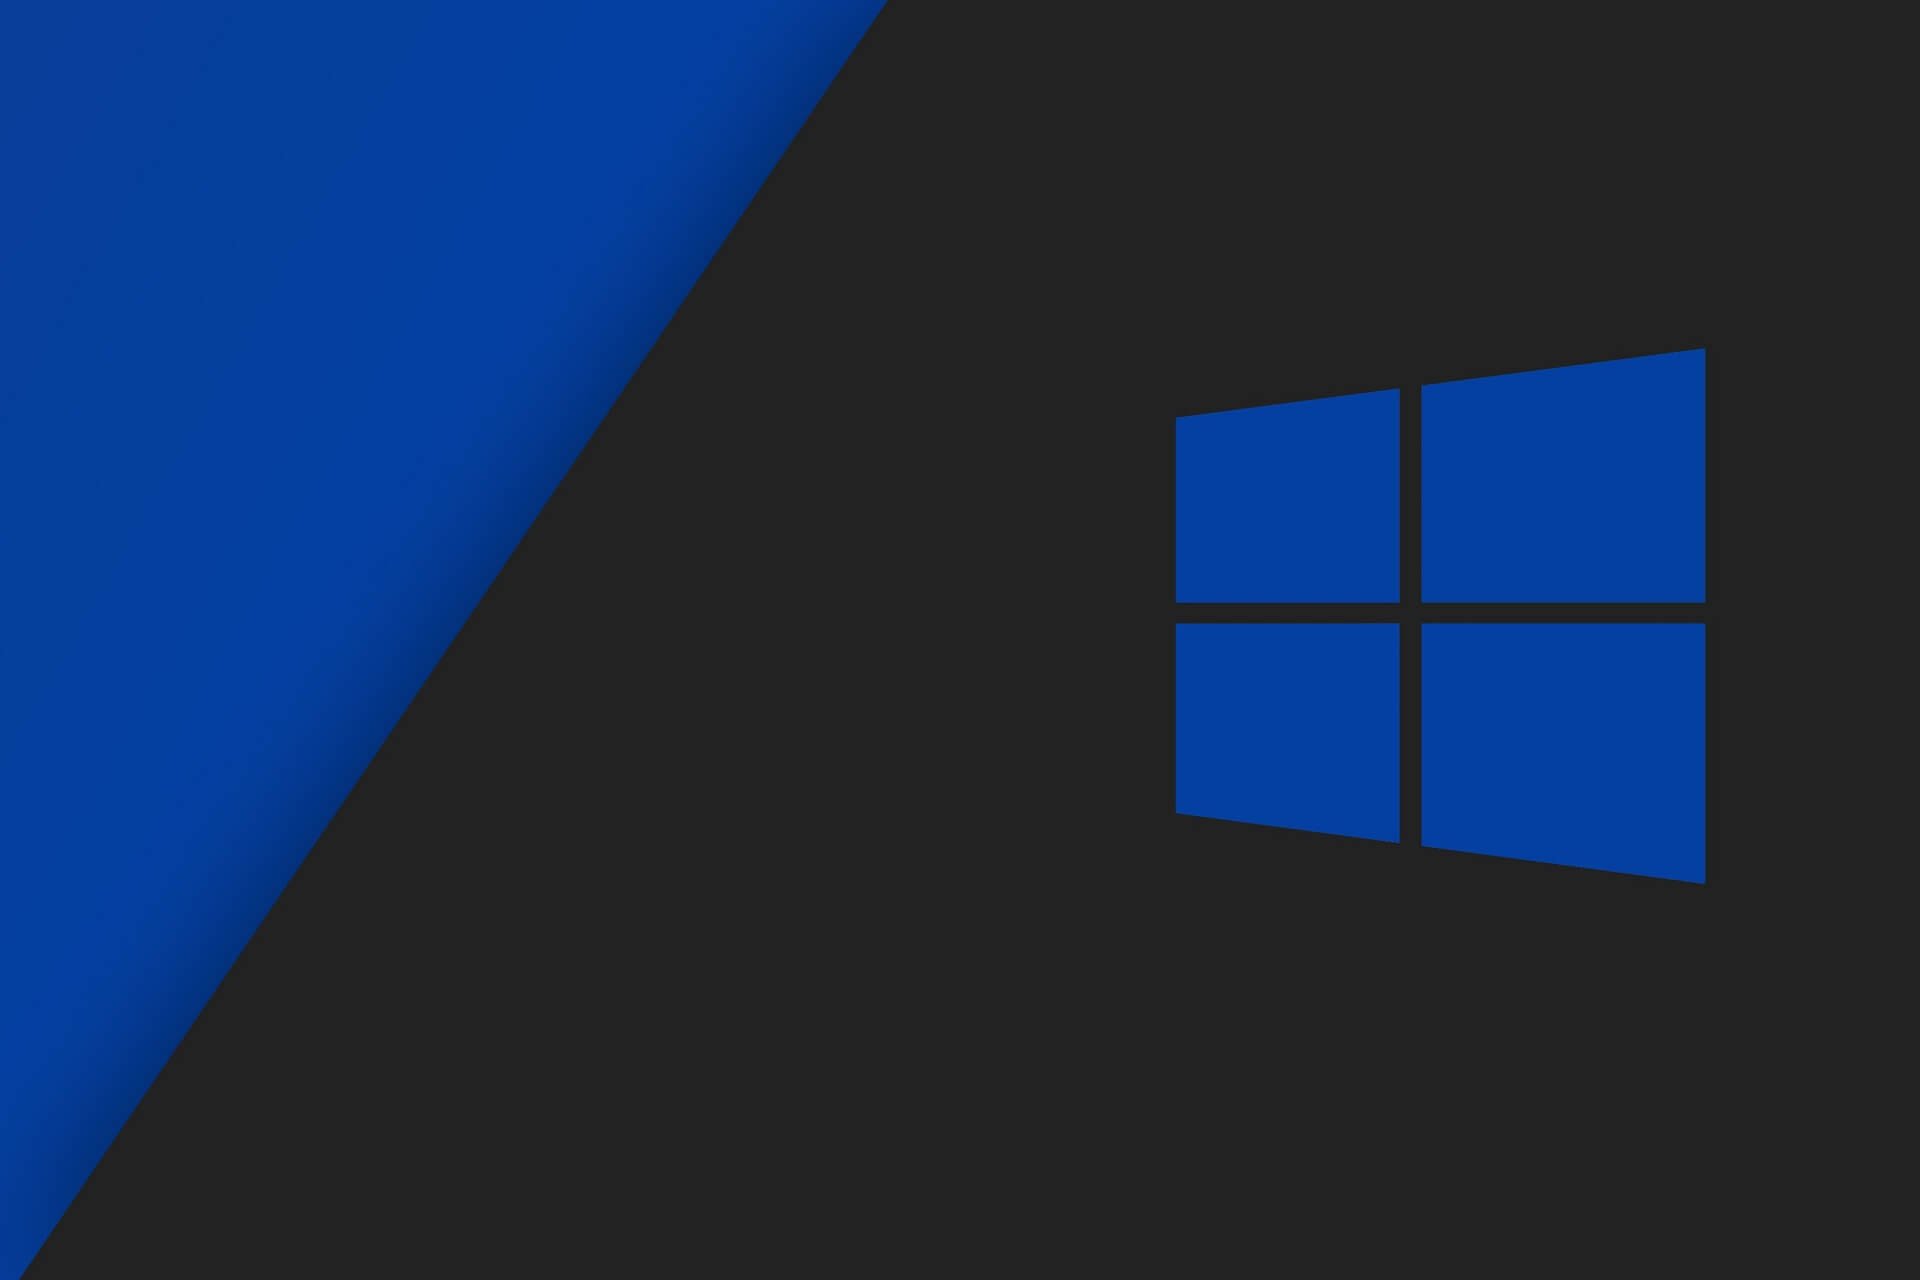 Driver updates will no longer cause compatibility issues in Windows 10